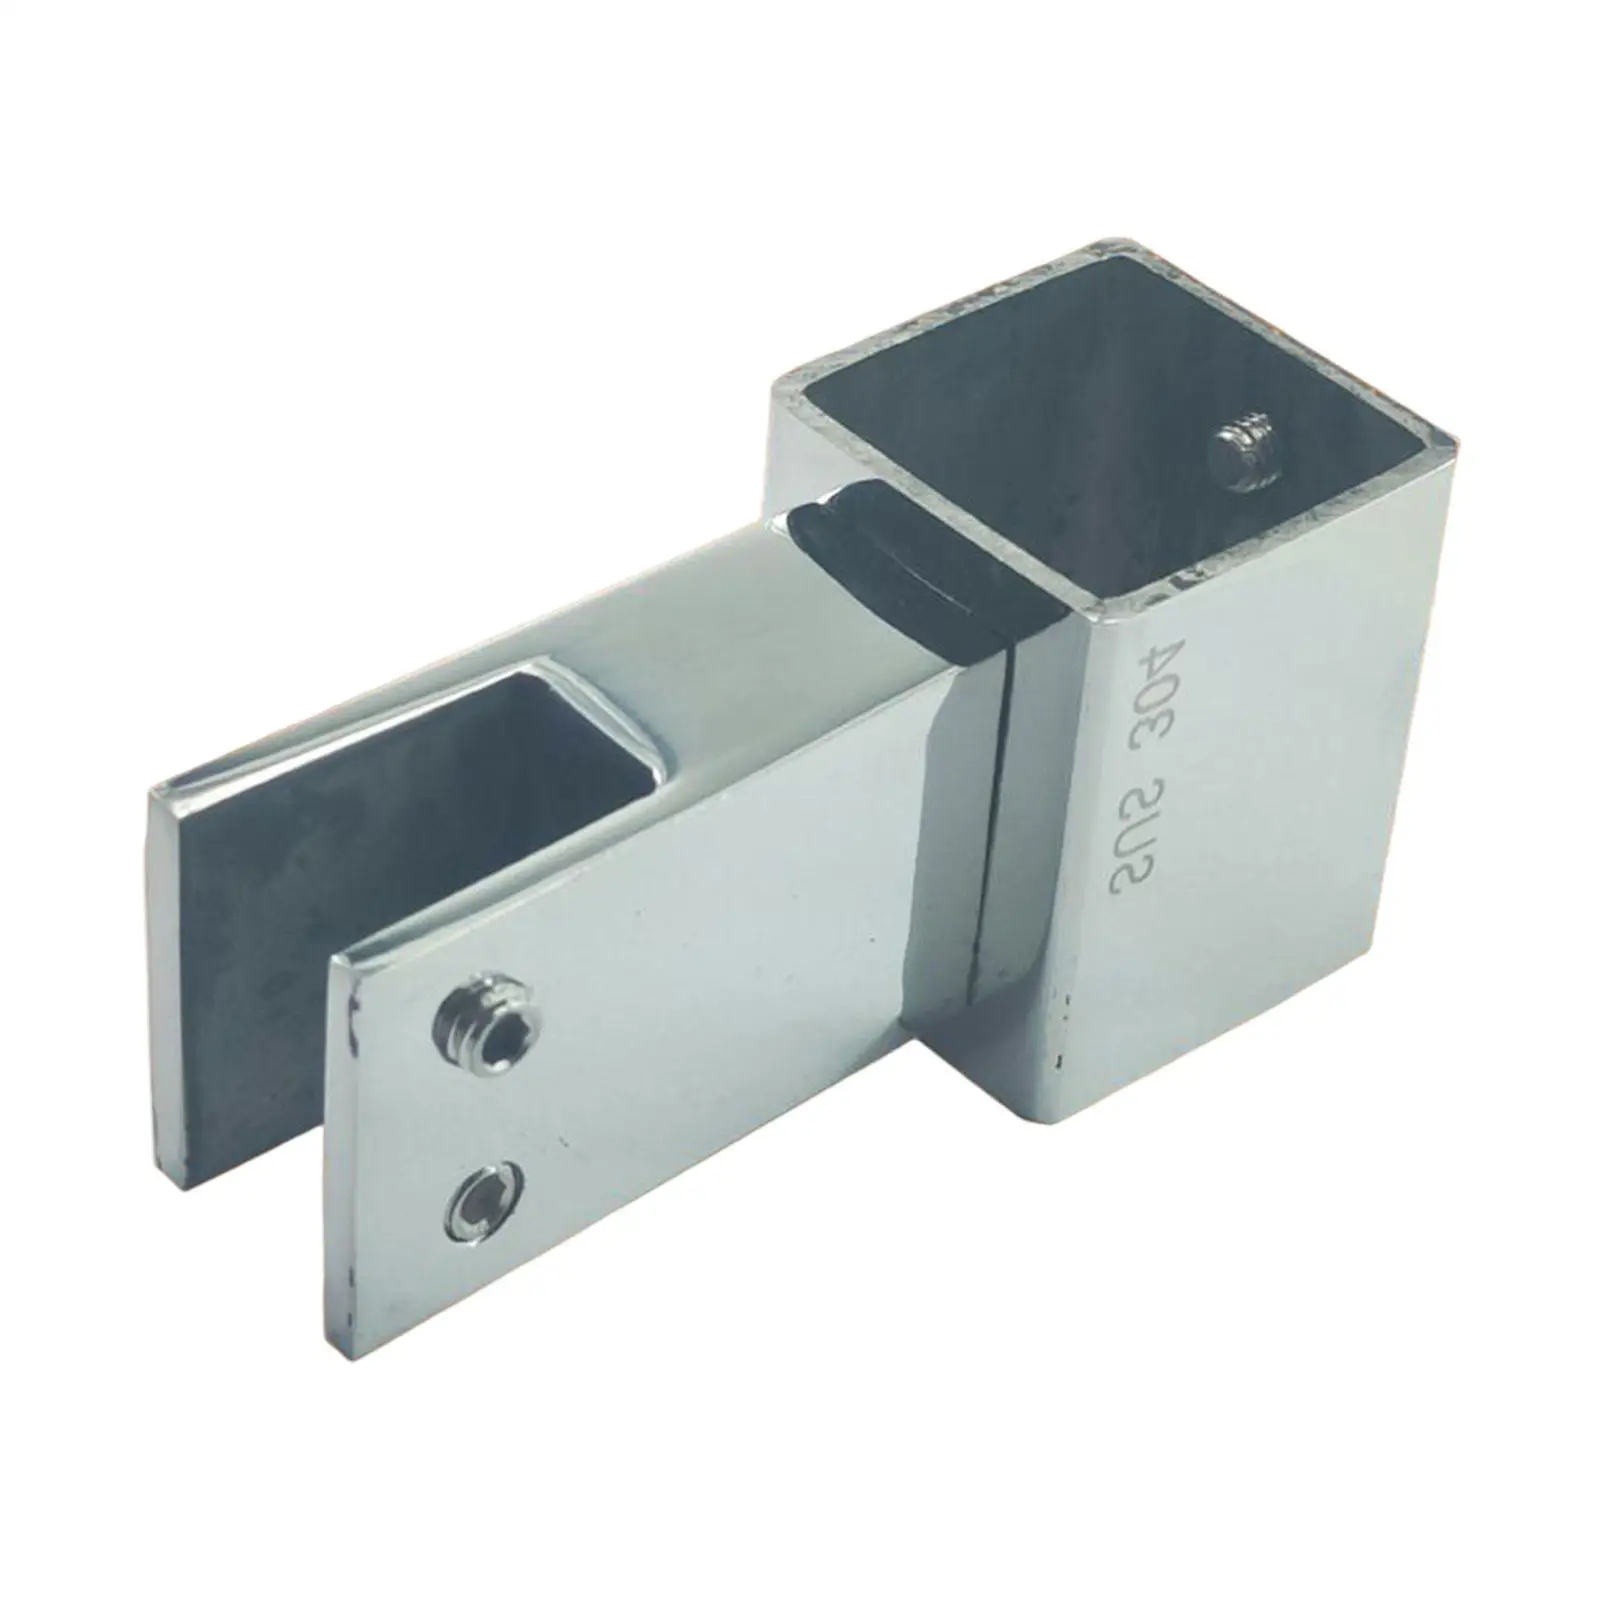 Square Pipe Connector for 28mm Square Pipe 304 Stainless Steel Hardware Flange Seat Corner Glass Pipe Fittings Connector T Clamp